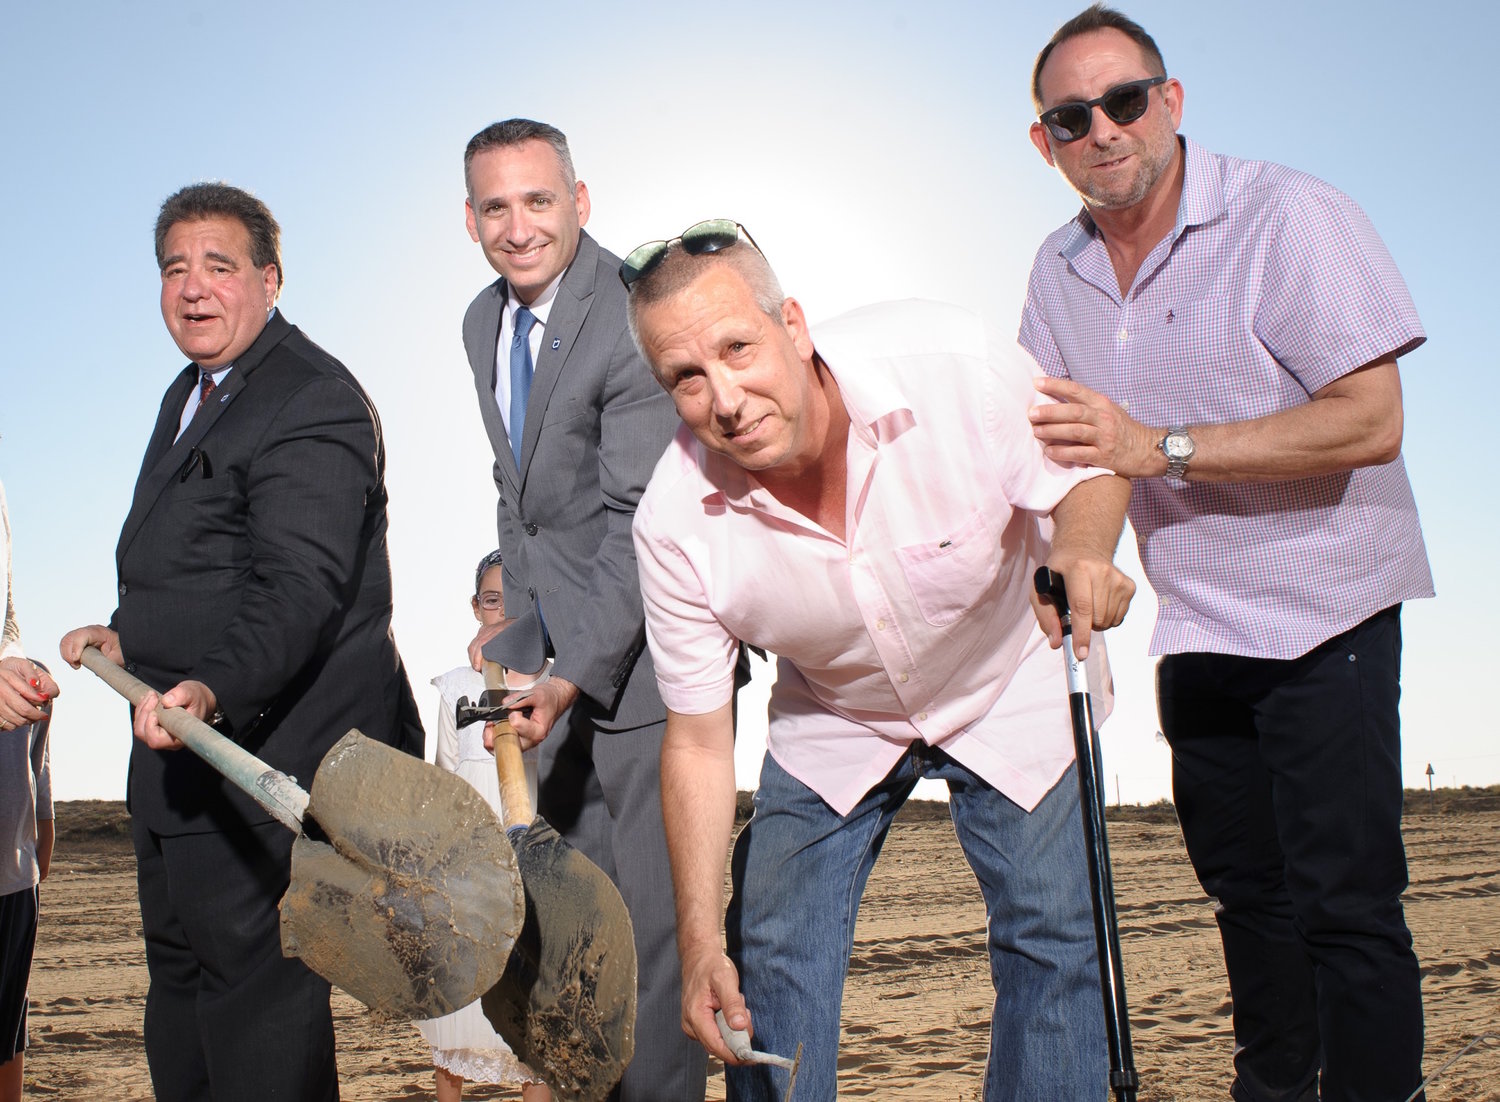 JNF CEO Russell Robinson, JNF Chief Israel Officer Eric Michaelson, Eshkol Regional Council Mayor Gadi Yarkoni, and JNF National Board Member Ron Werner lay the cornerstone for the new Halutza Community Center, providing a civic, cultural, and economic center for the entire Eshkol Region.